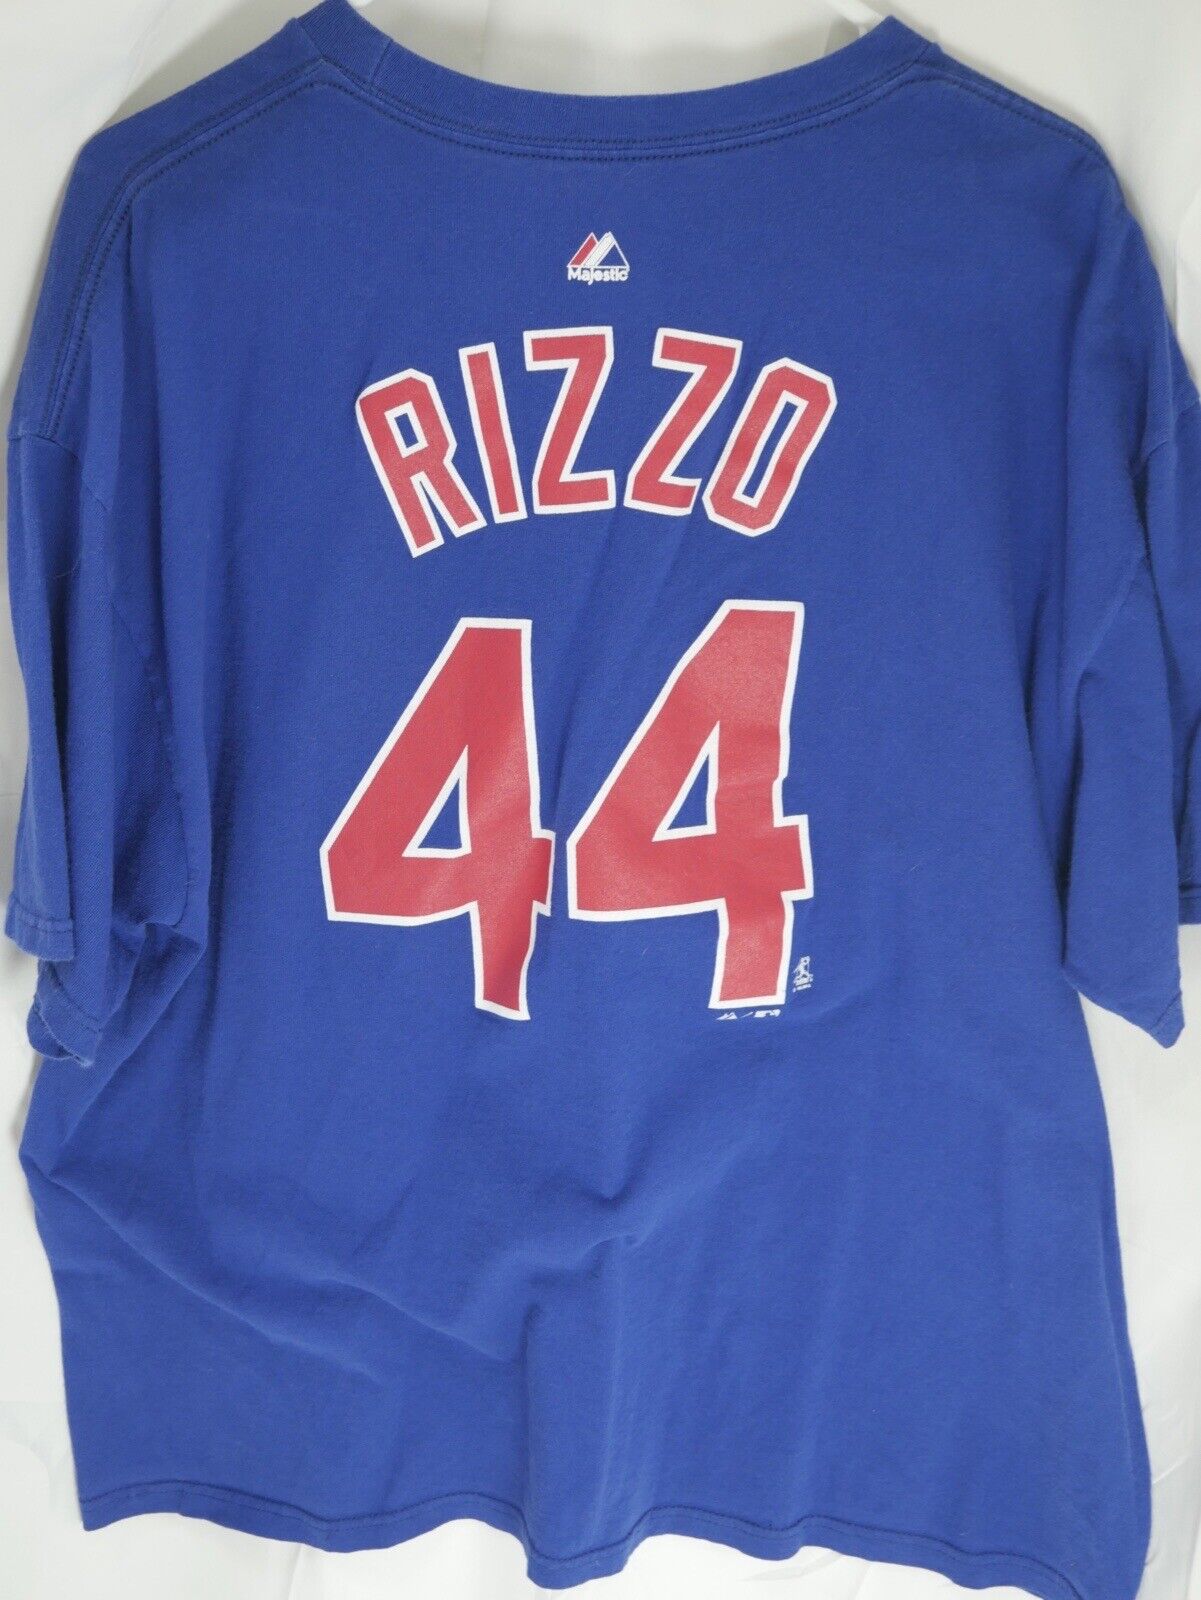 Anthony Rizzo #44 Chicago Cubs Home Authentic Jersey by Majestic Sz 44  & 48 NWT